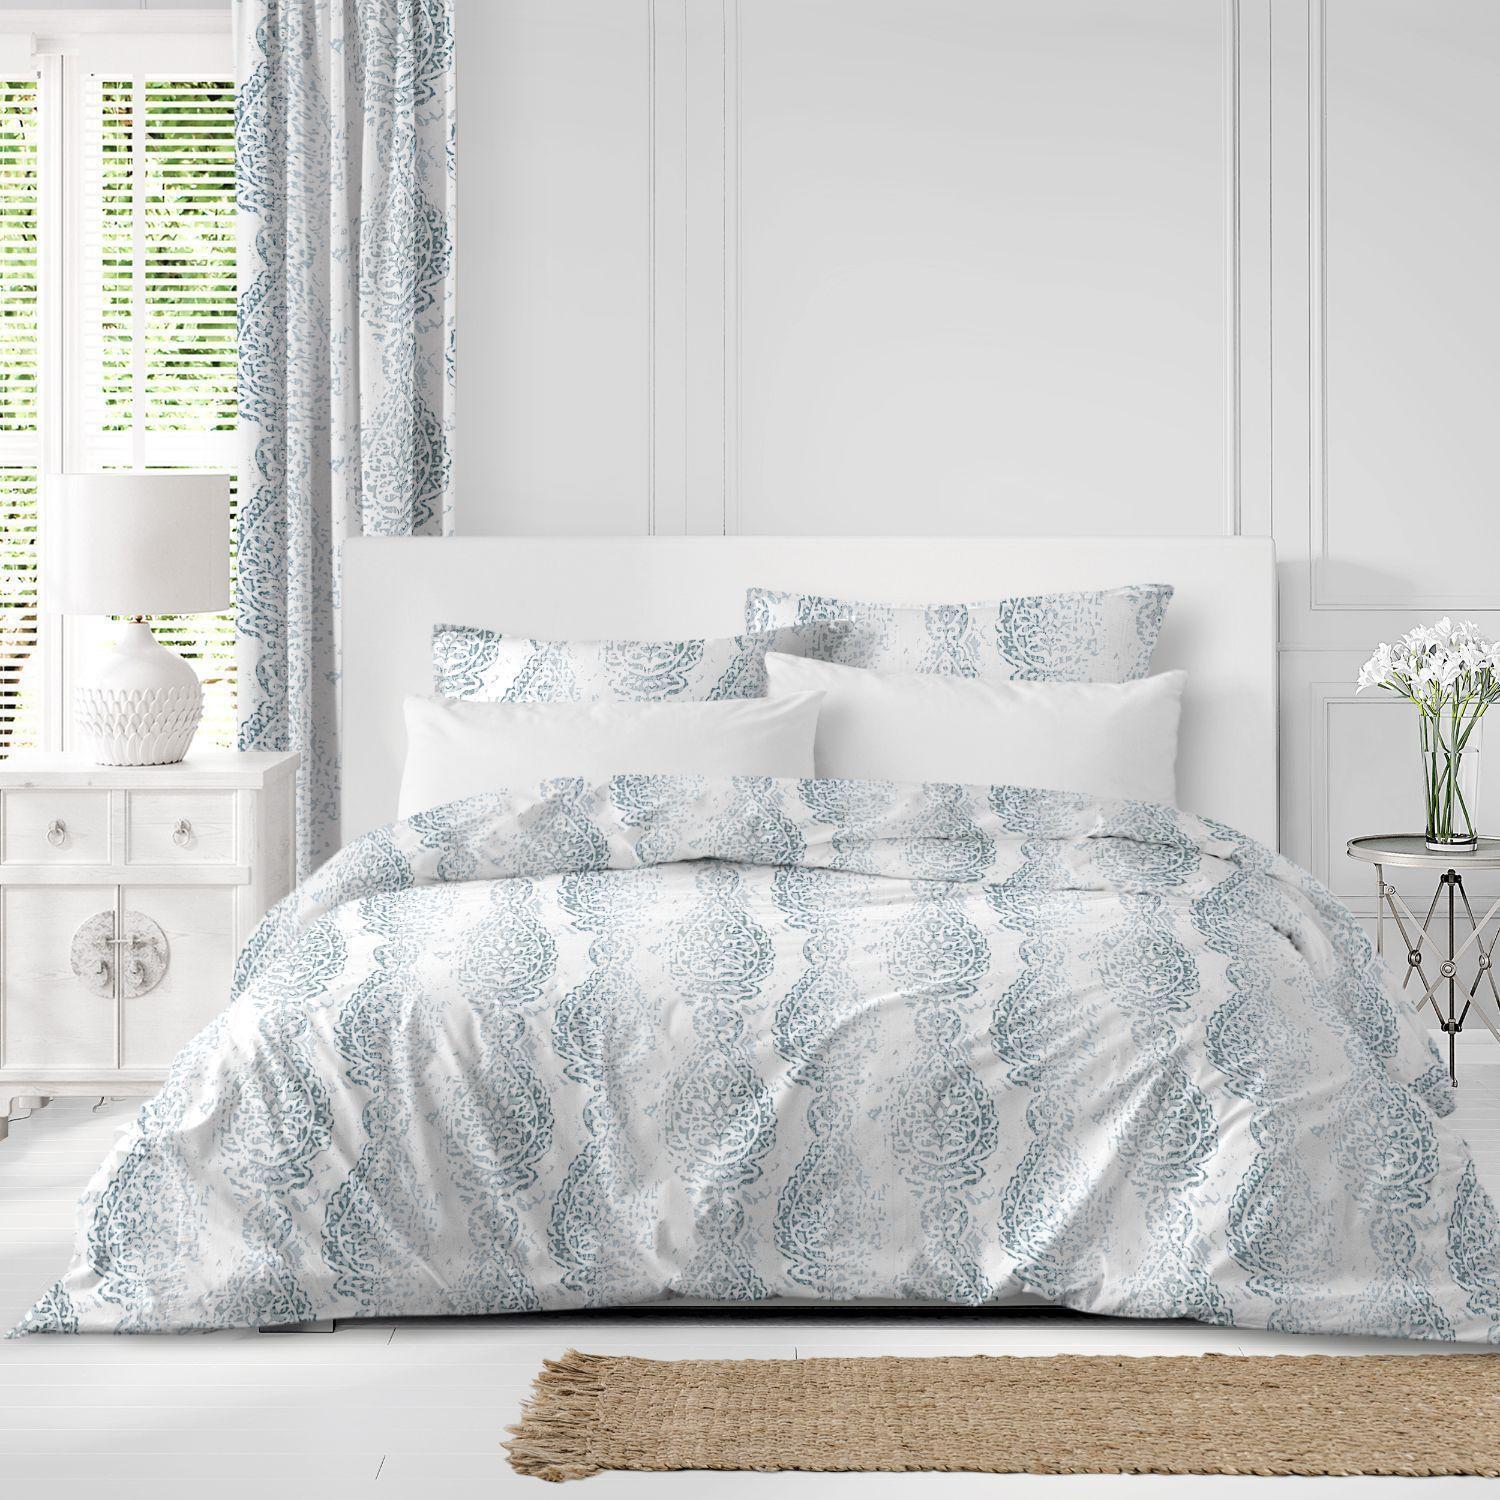 Set of 3 White and Blue Distressed Paisley Comforter with Pillow Shams - Super Queen alternate image